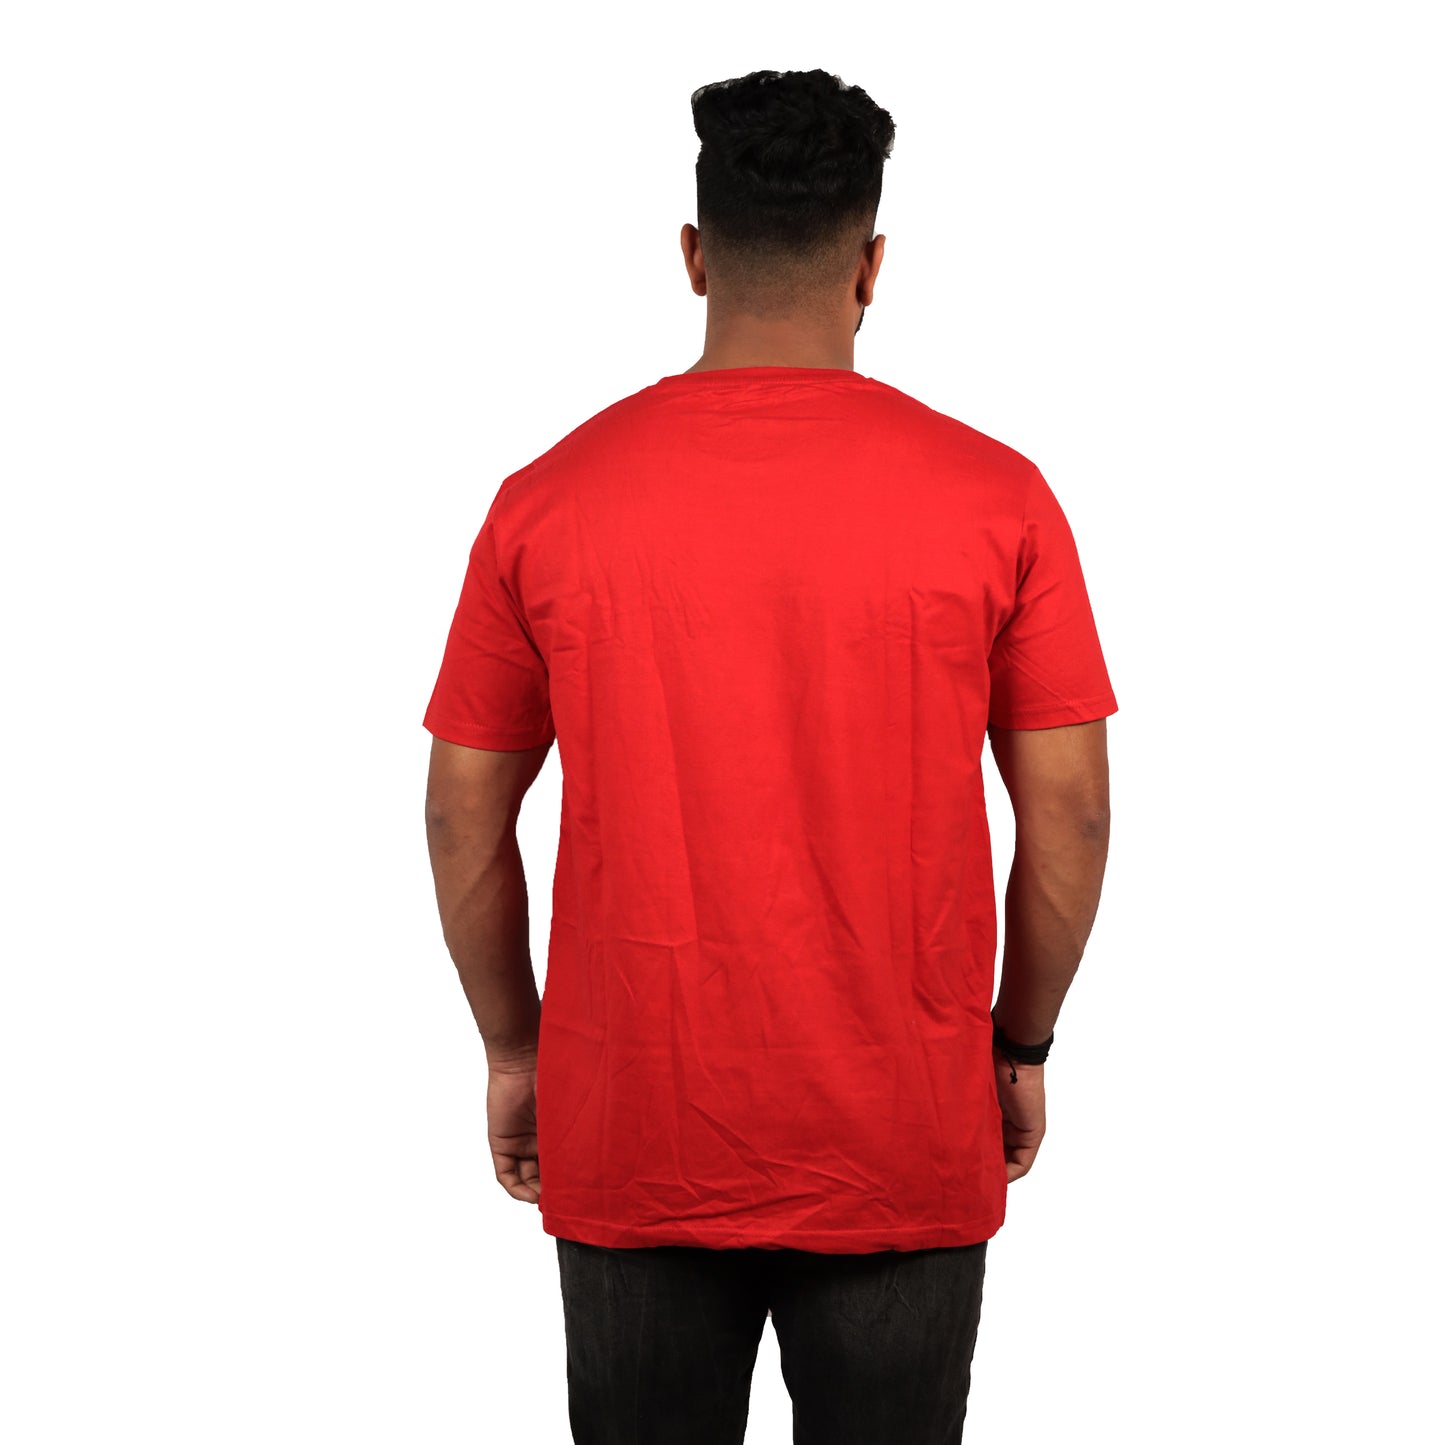 Viking T-shirt In Red Color For Men